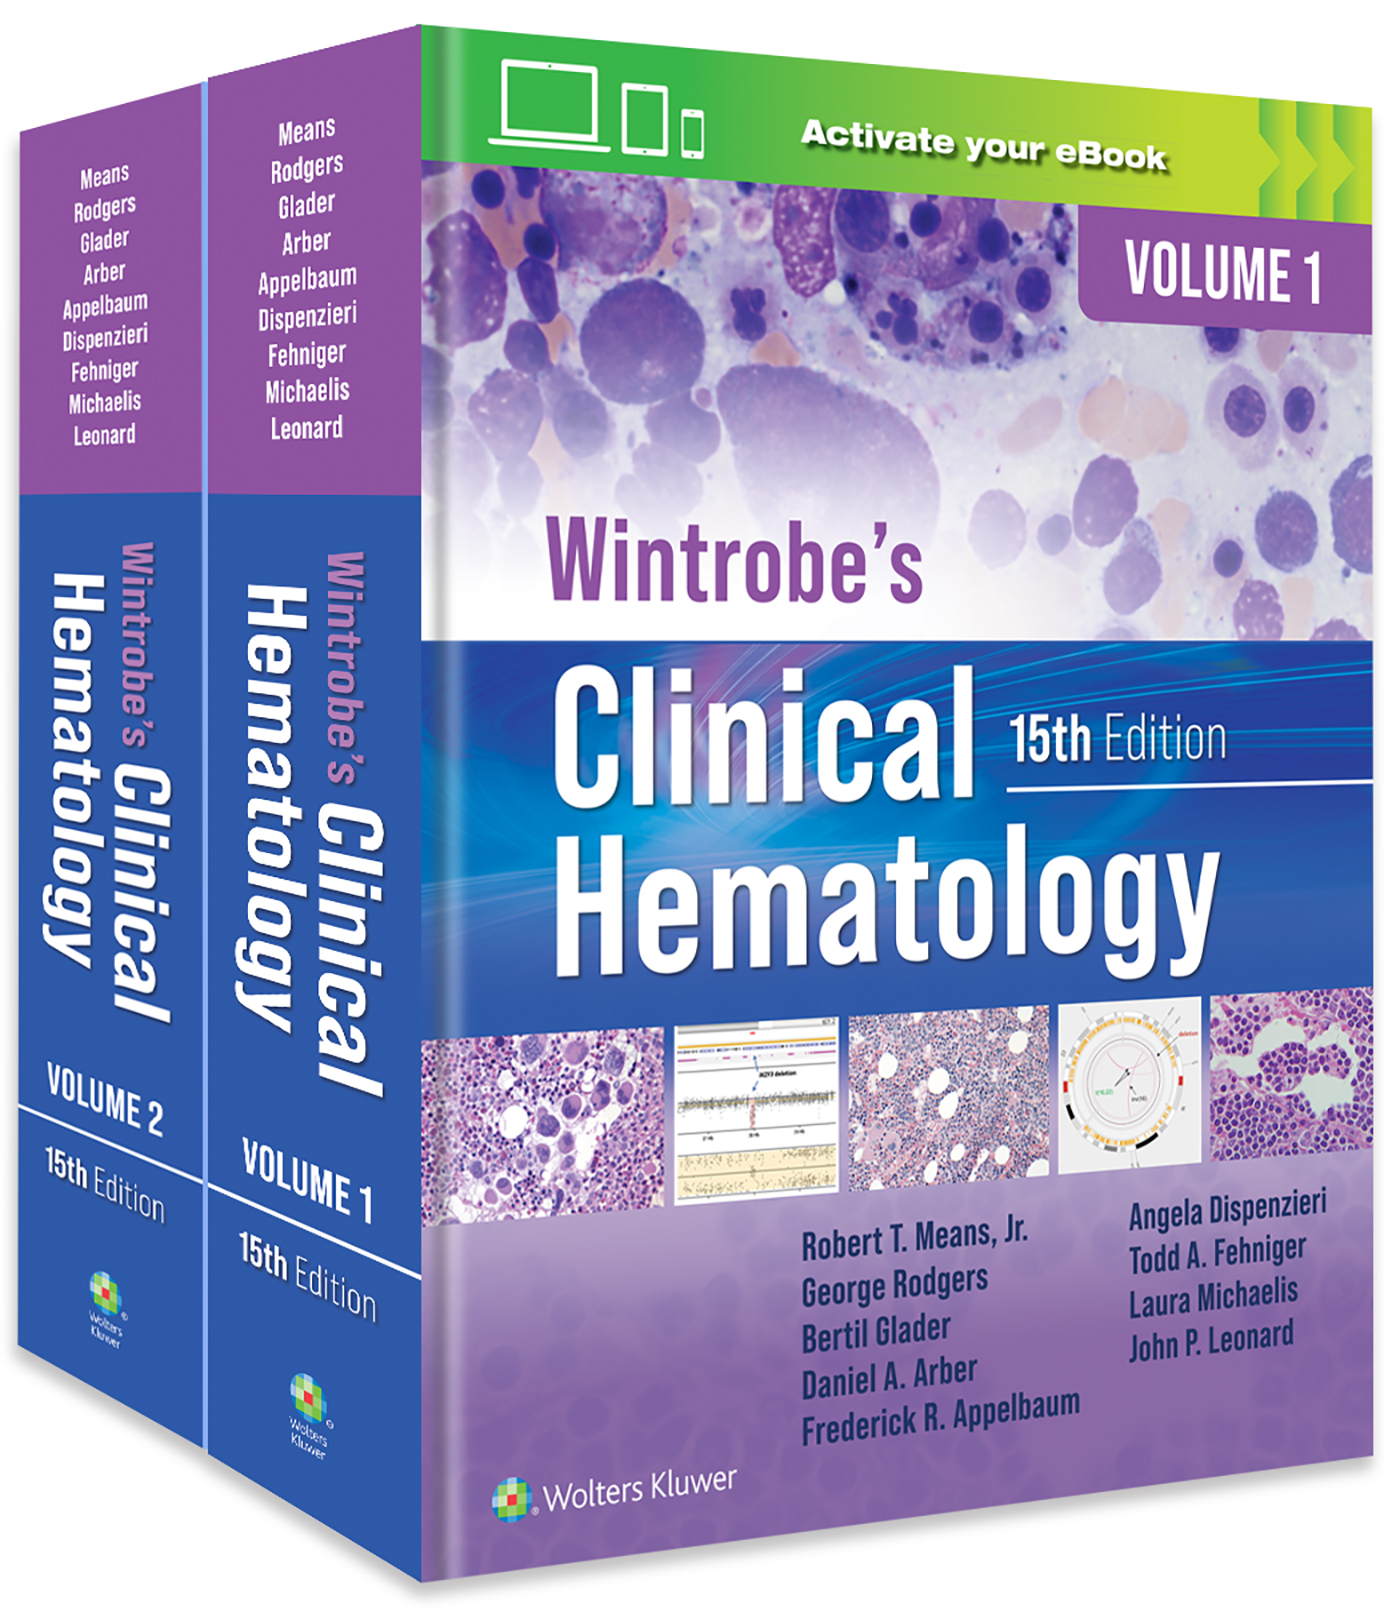 Wintrobe's Clinical Hematology, 15th Edition book cover